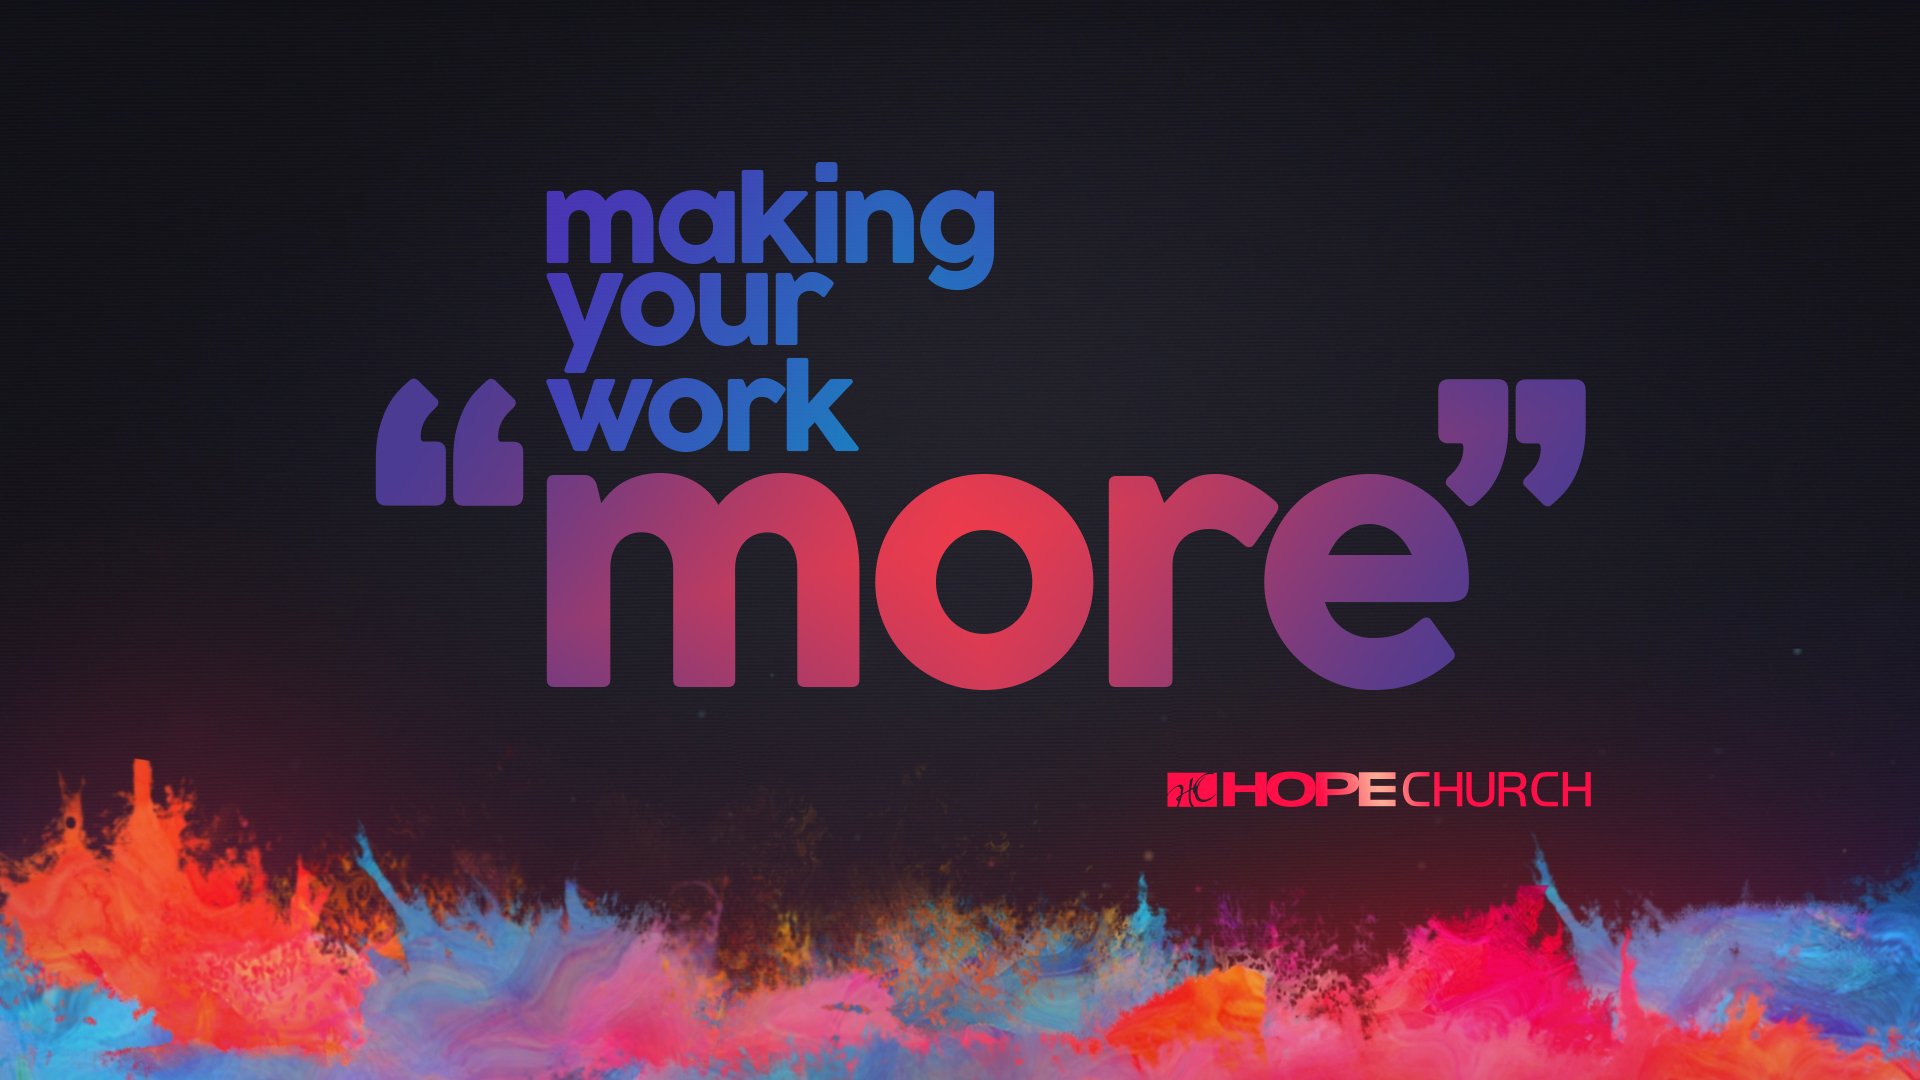 HOPE Church - Making Your Work More Concept.jpg